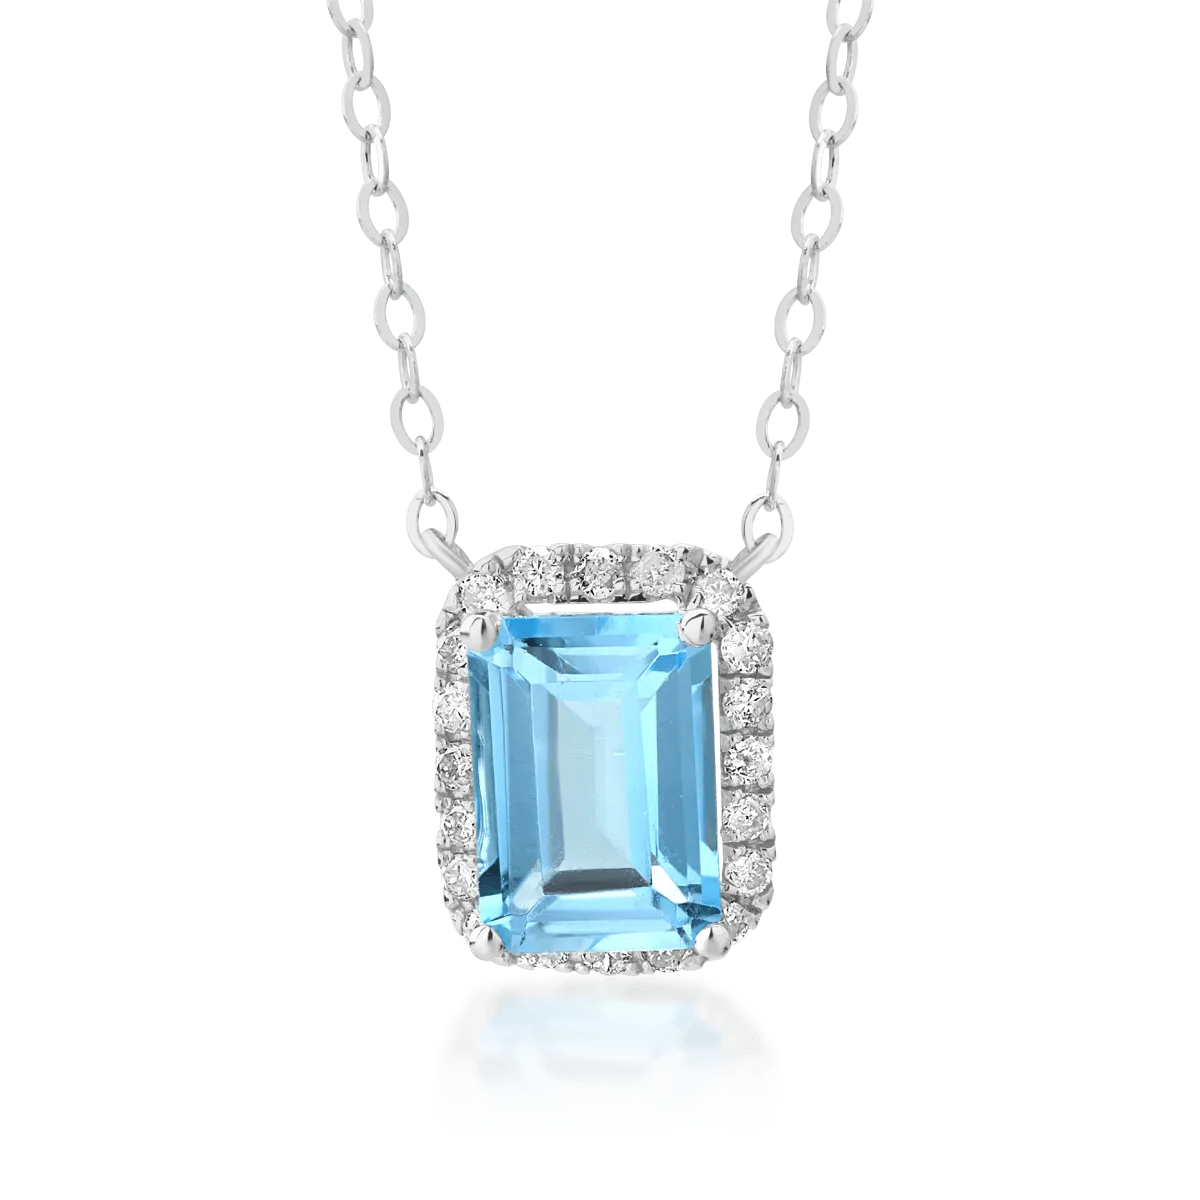 18K white gold pendant necklace with 1.18ct blue topaz and 0.12ct diamonds